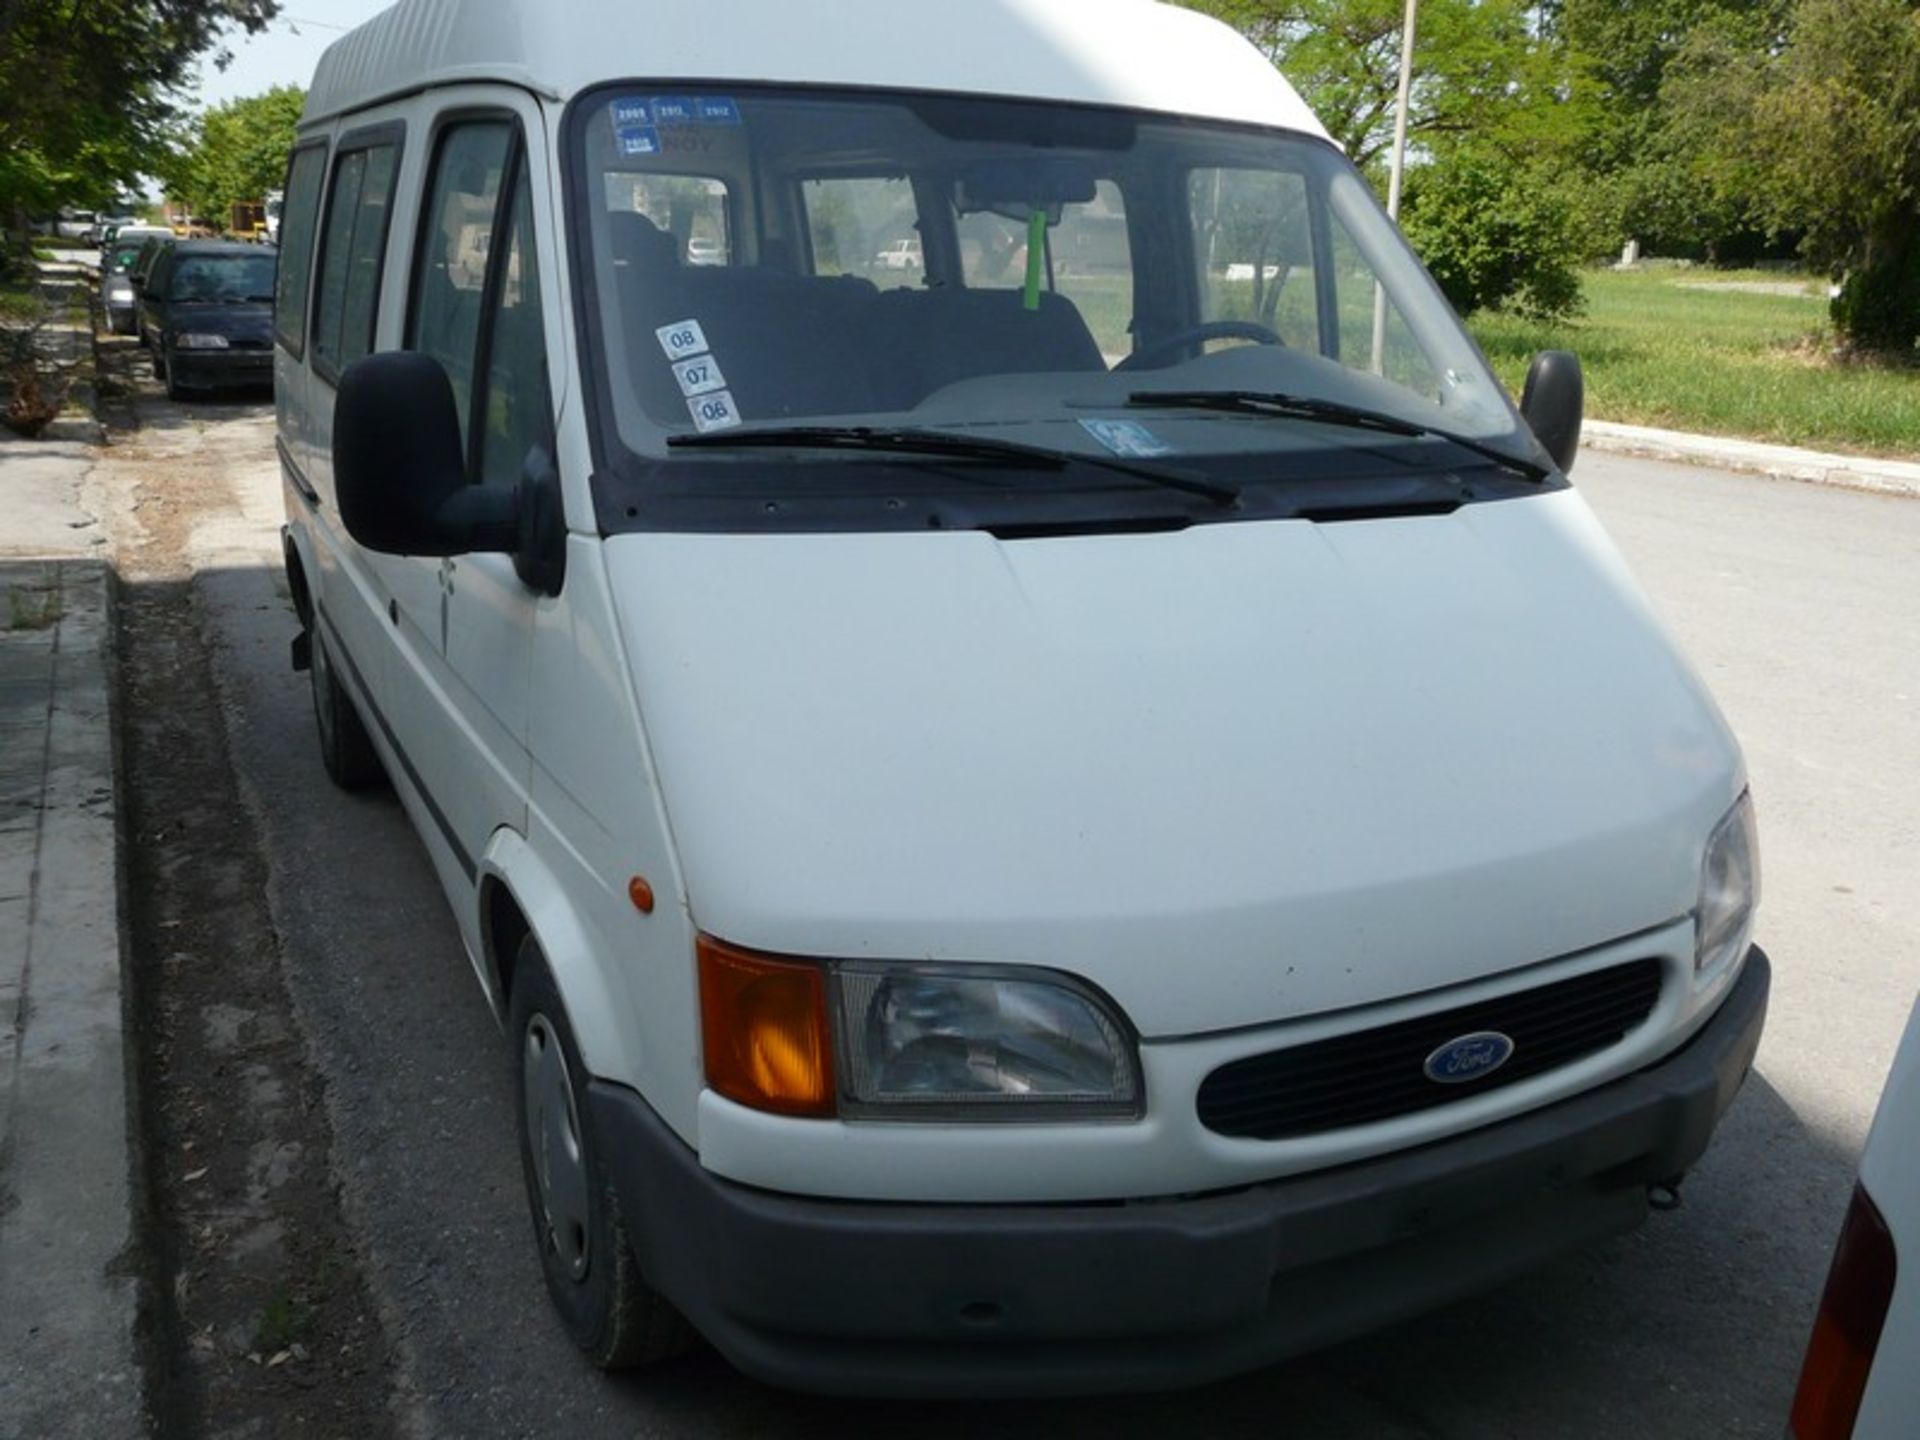 FORD TRANSIT, buss115, diesel, KM 146159, 11 seats, REG NEE 7504, Year: 1997 (Located in Greece - - Image 3 of 9